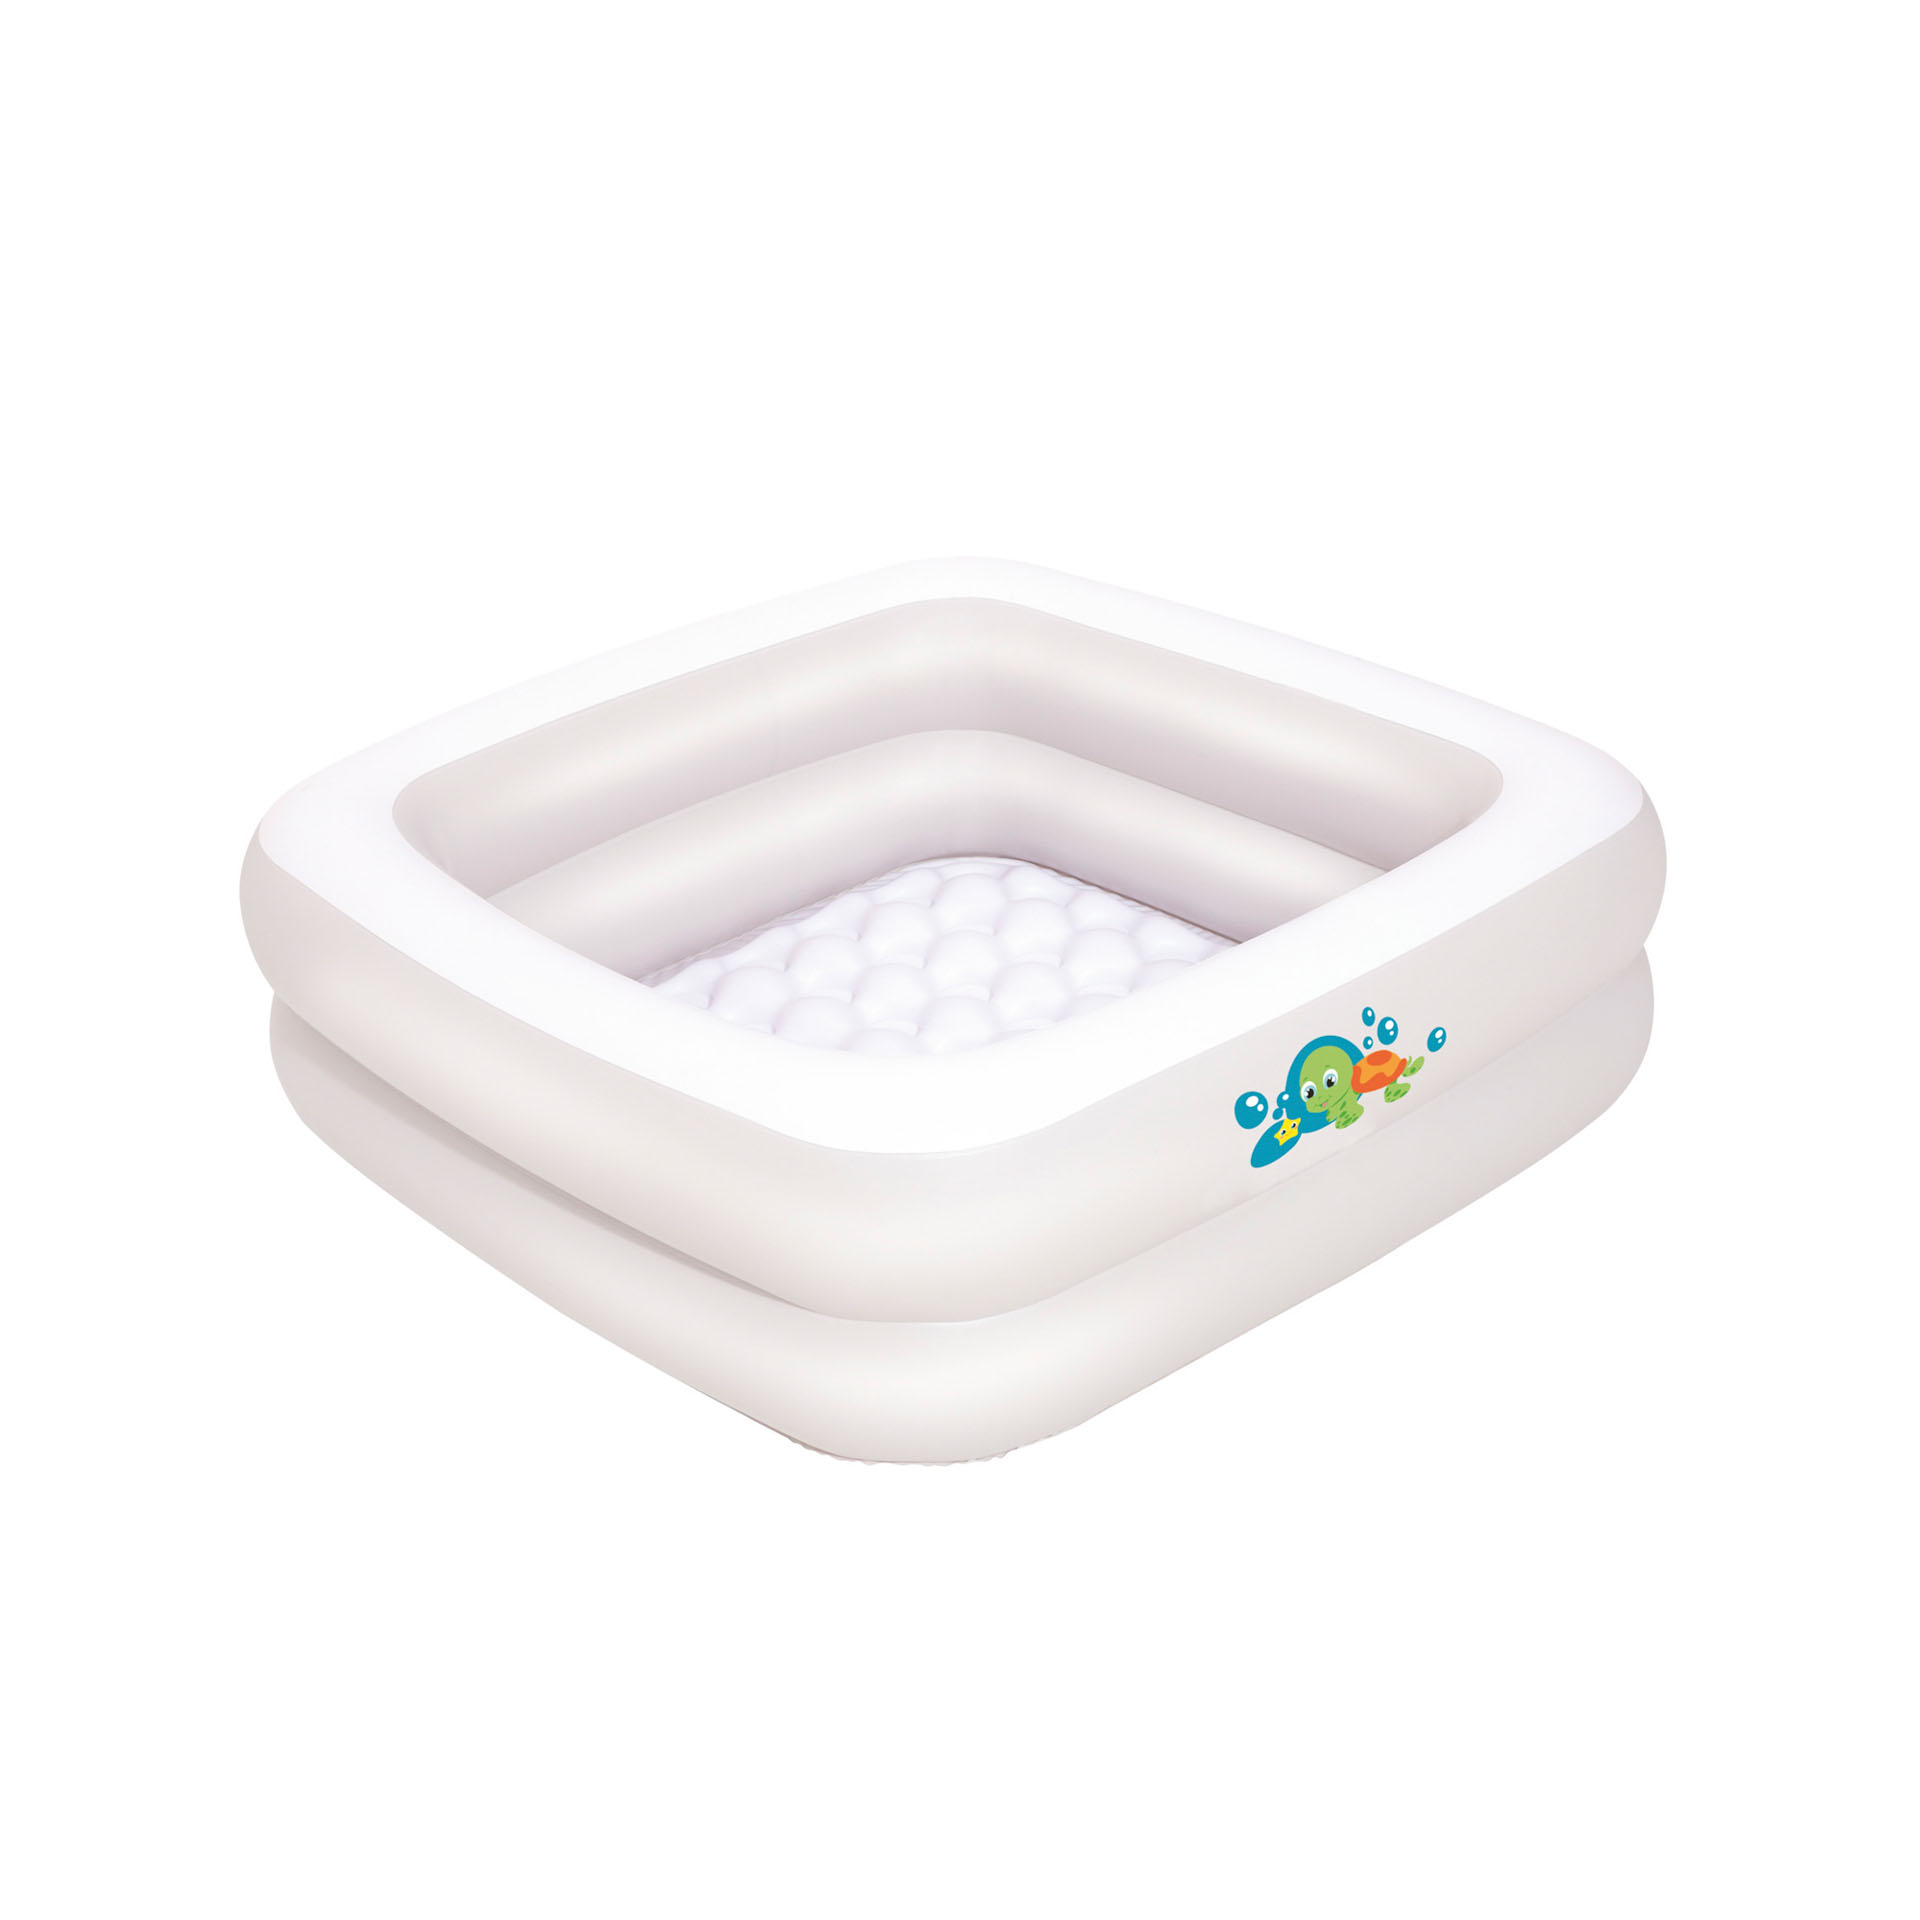 Piscina gonfiabile bagnetto baby, , large